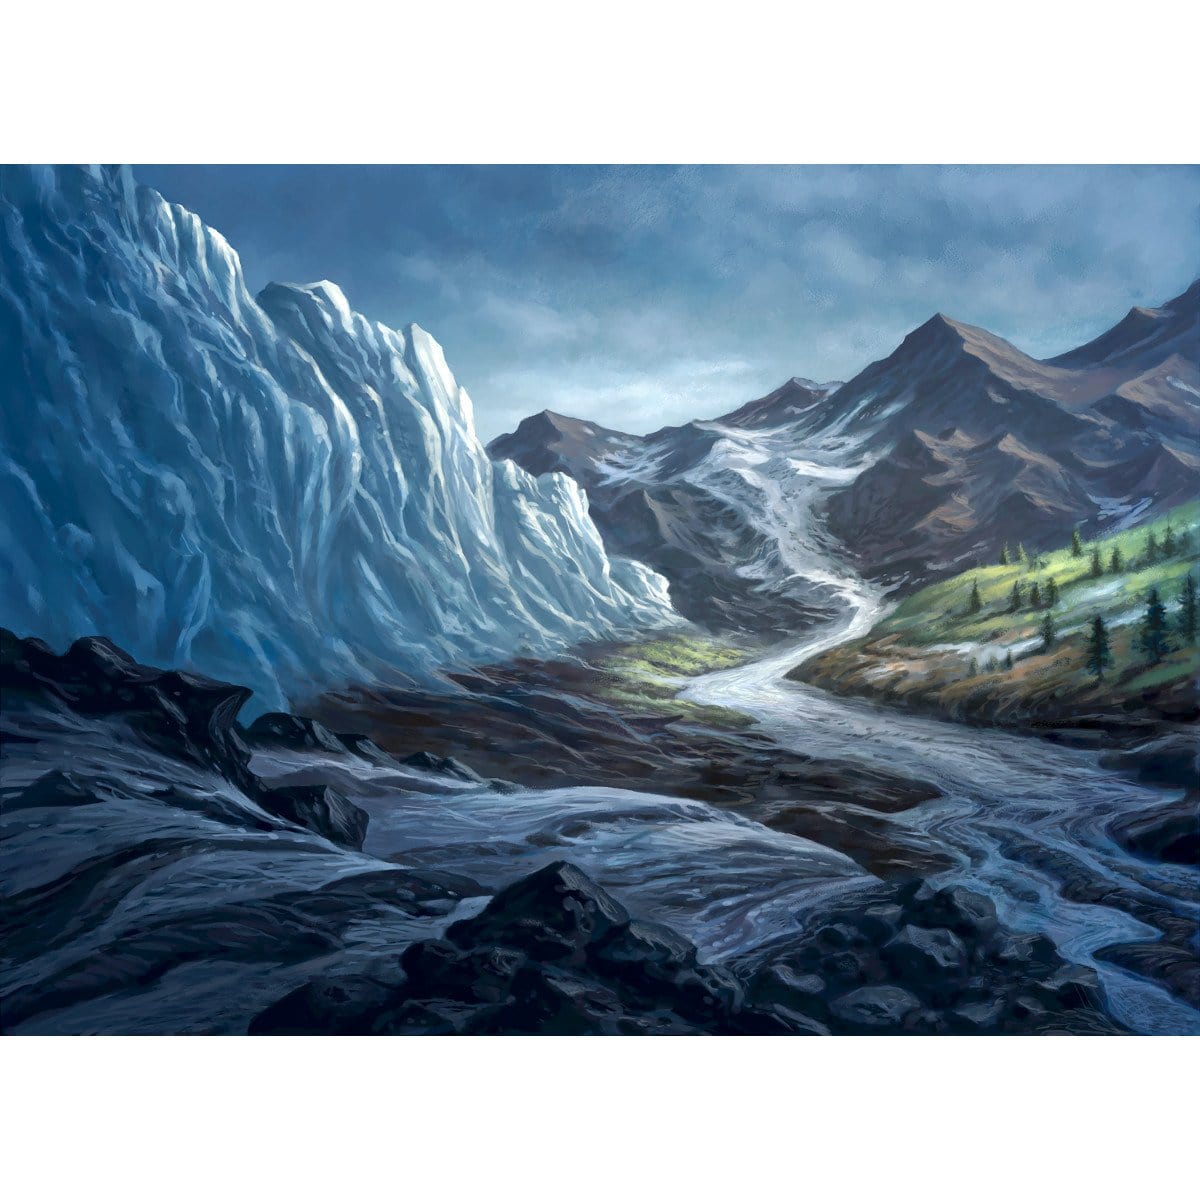 Thawing Glaciers Print - Print - Original Magic Art - Accessories for Magic the Gathering and other card games